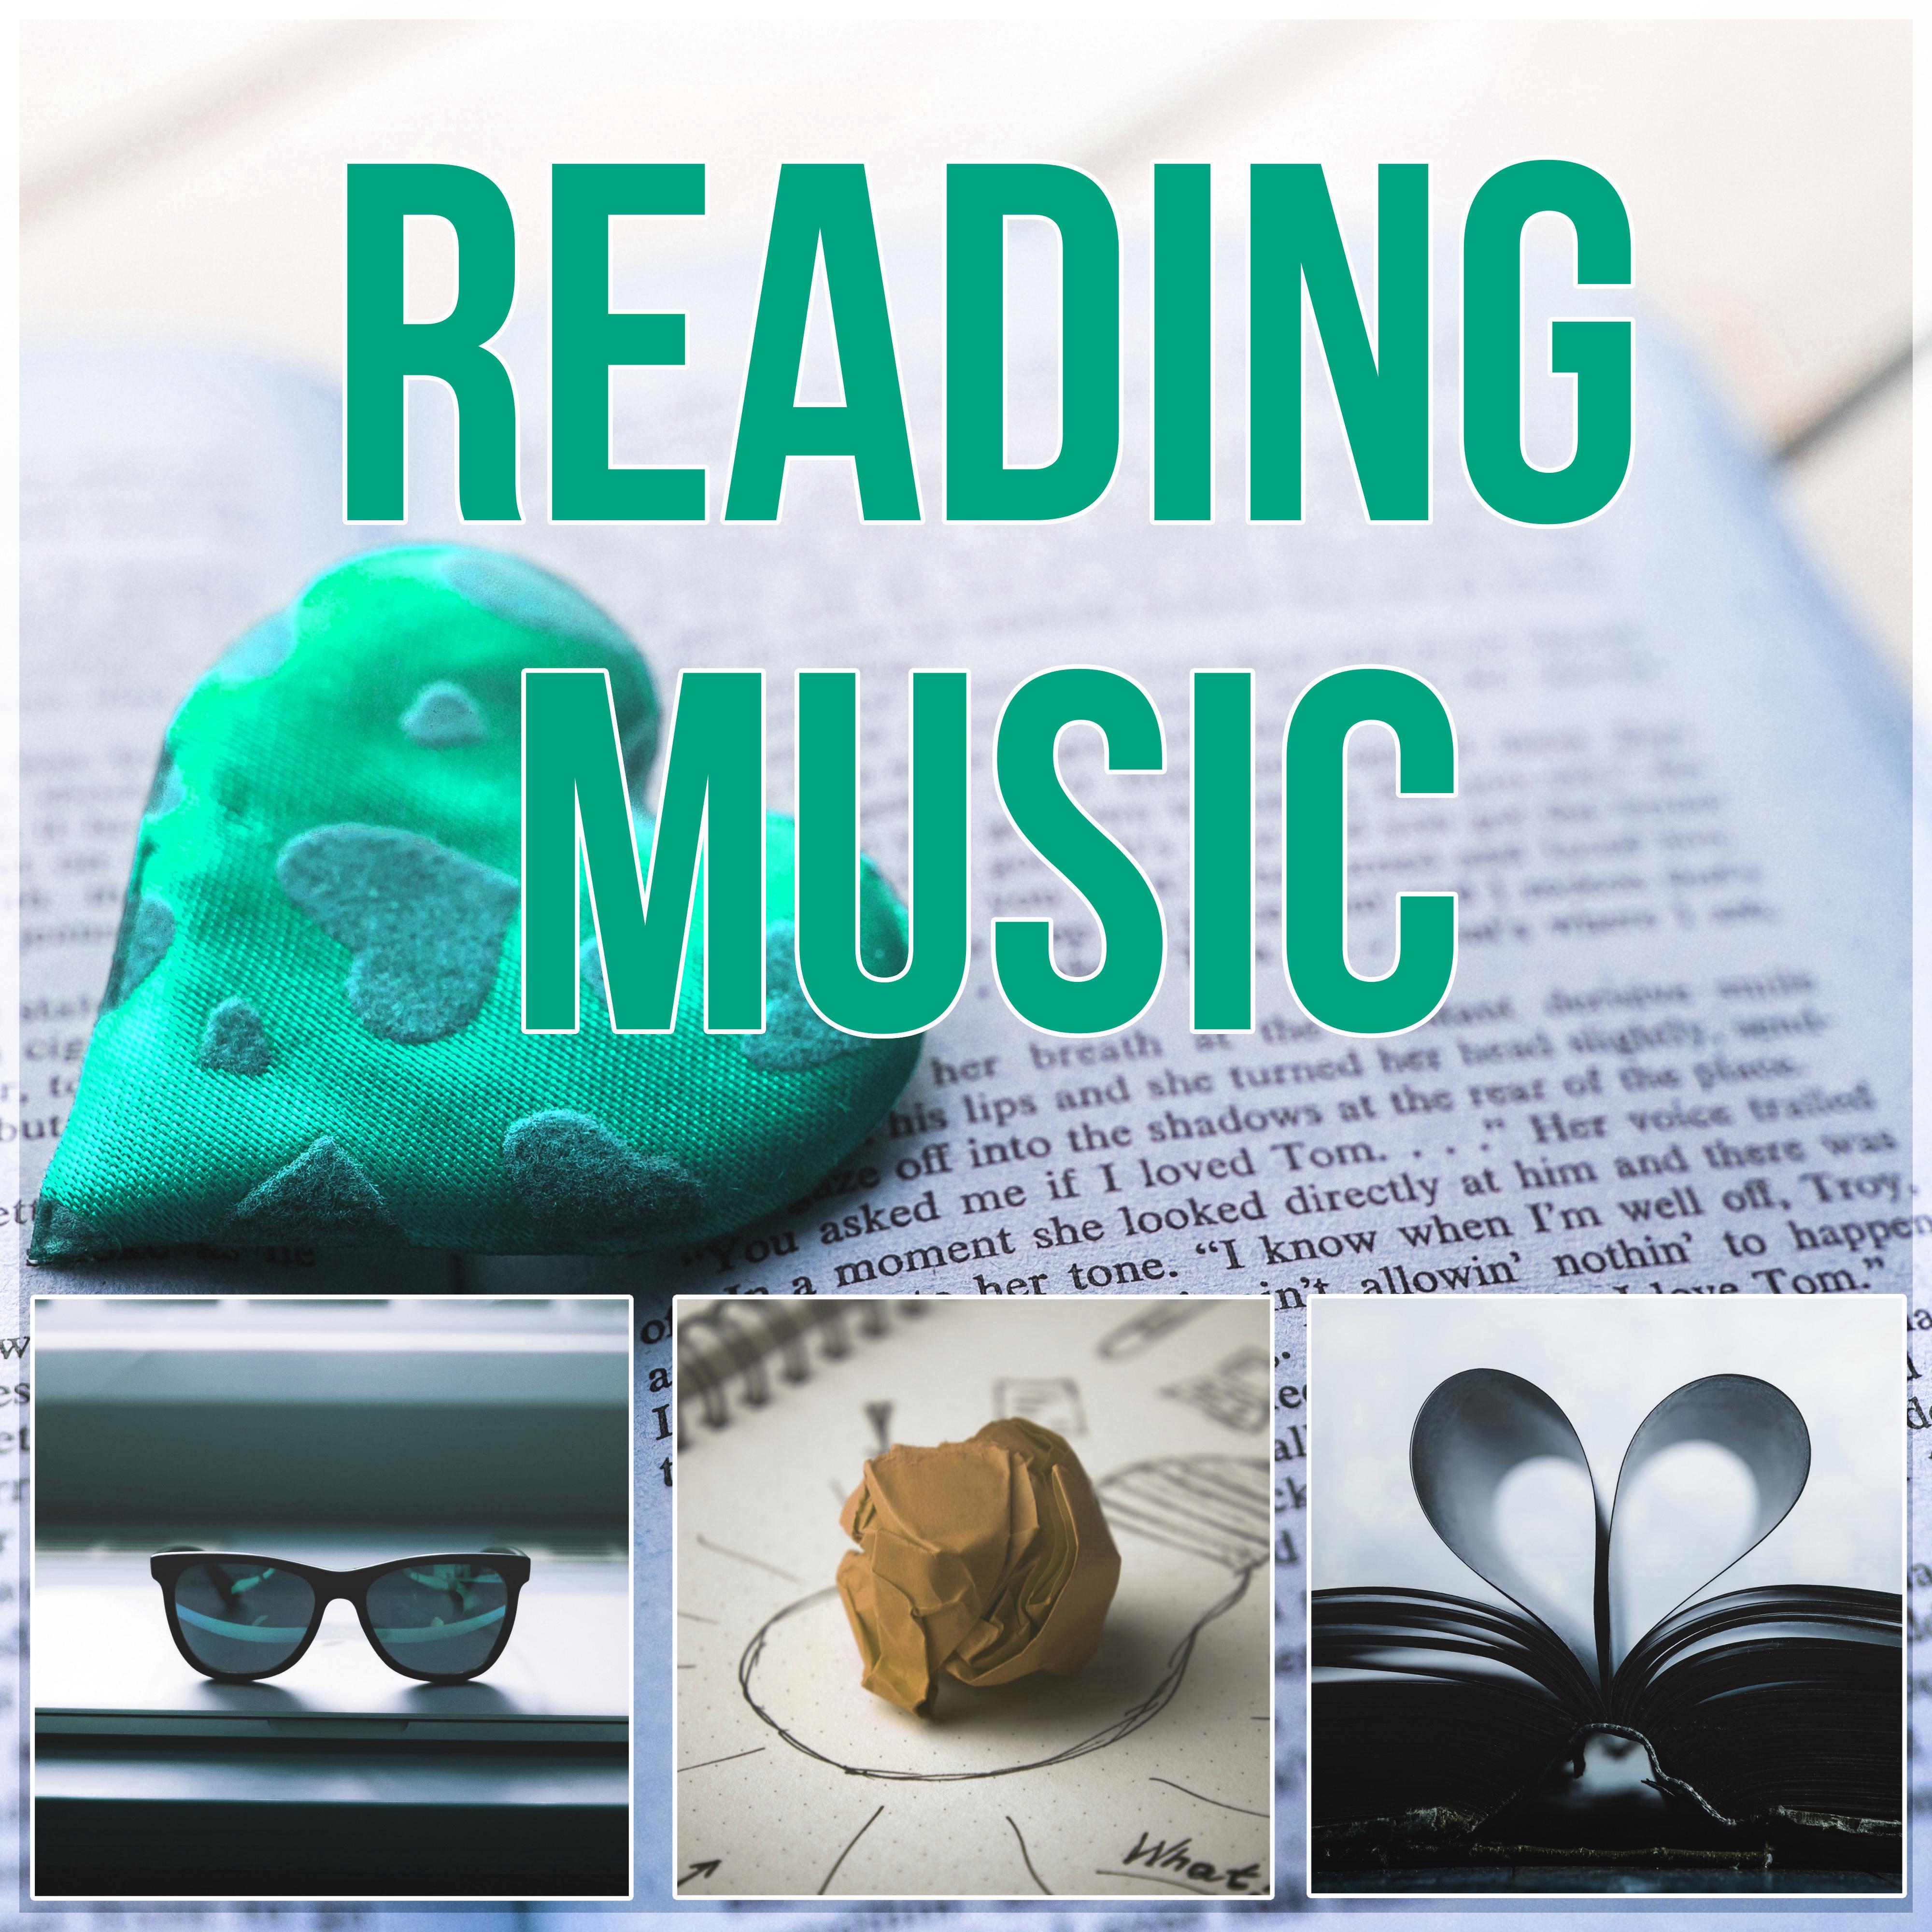 Reading Music - Focus & Brain Power, Relaxing Piano Music for Reading, Learning, Writing